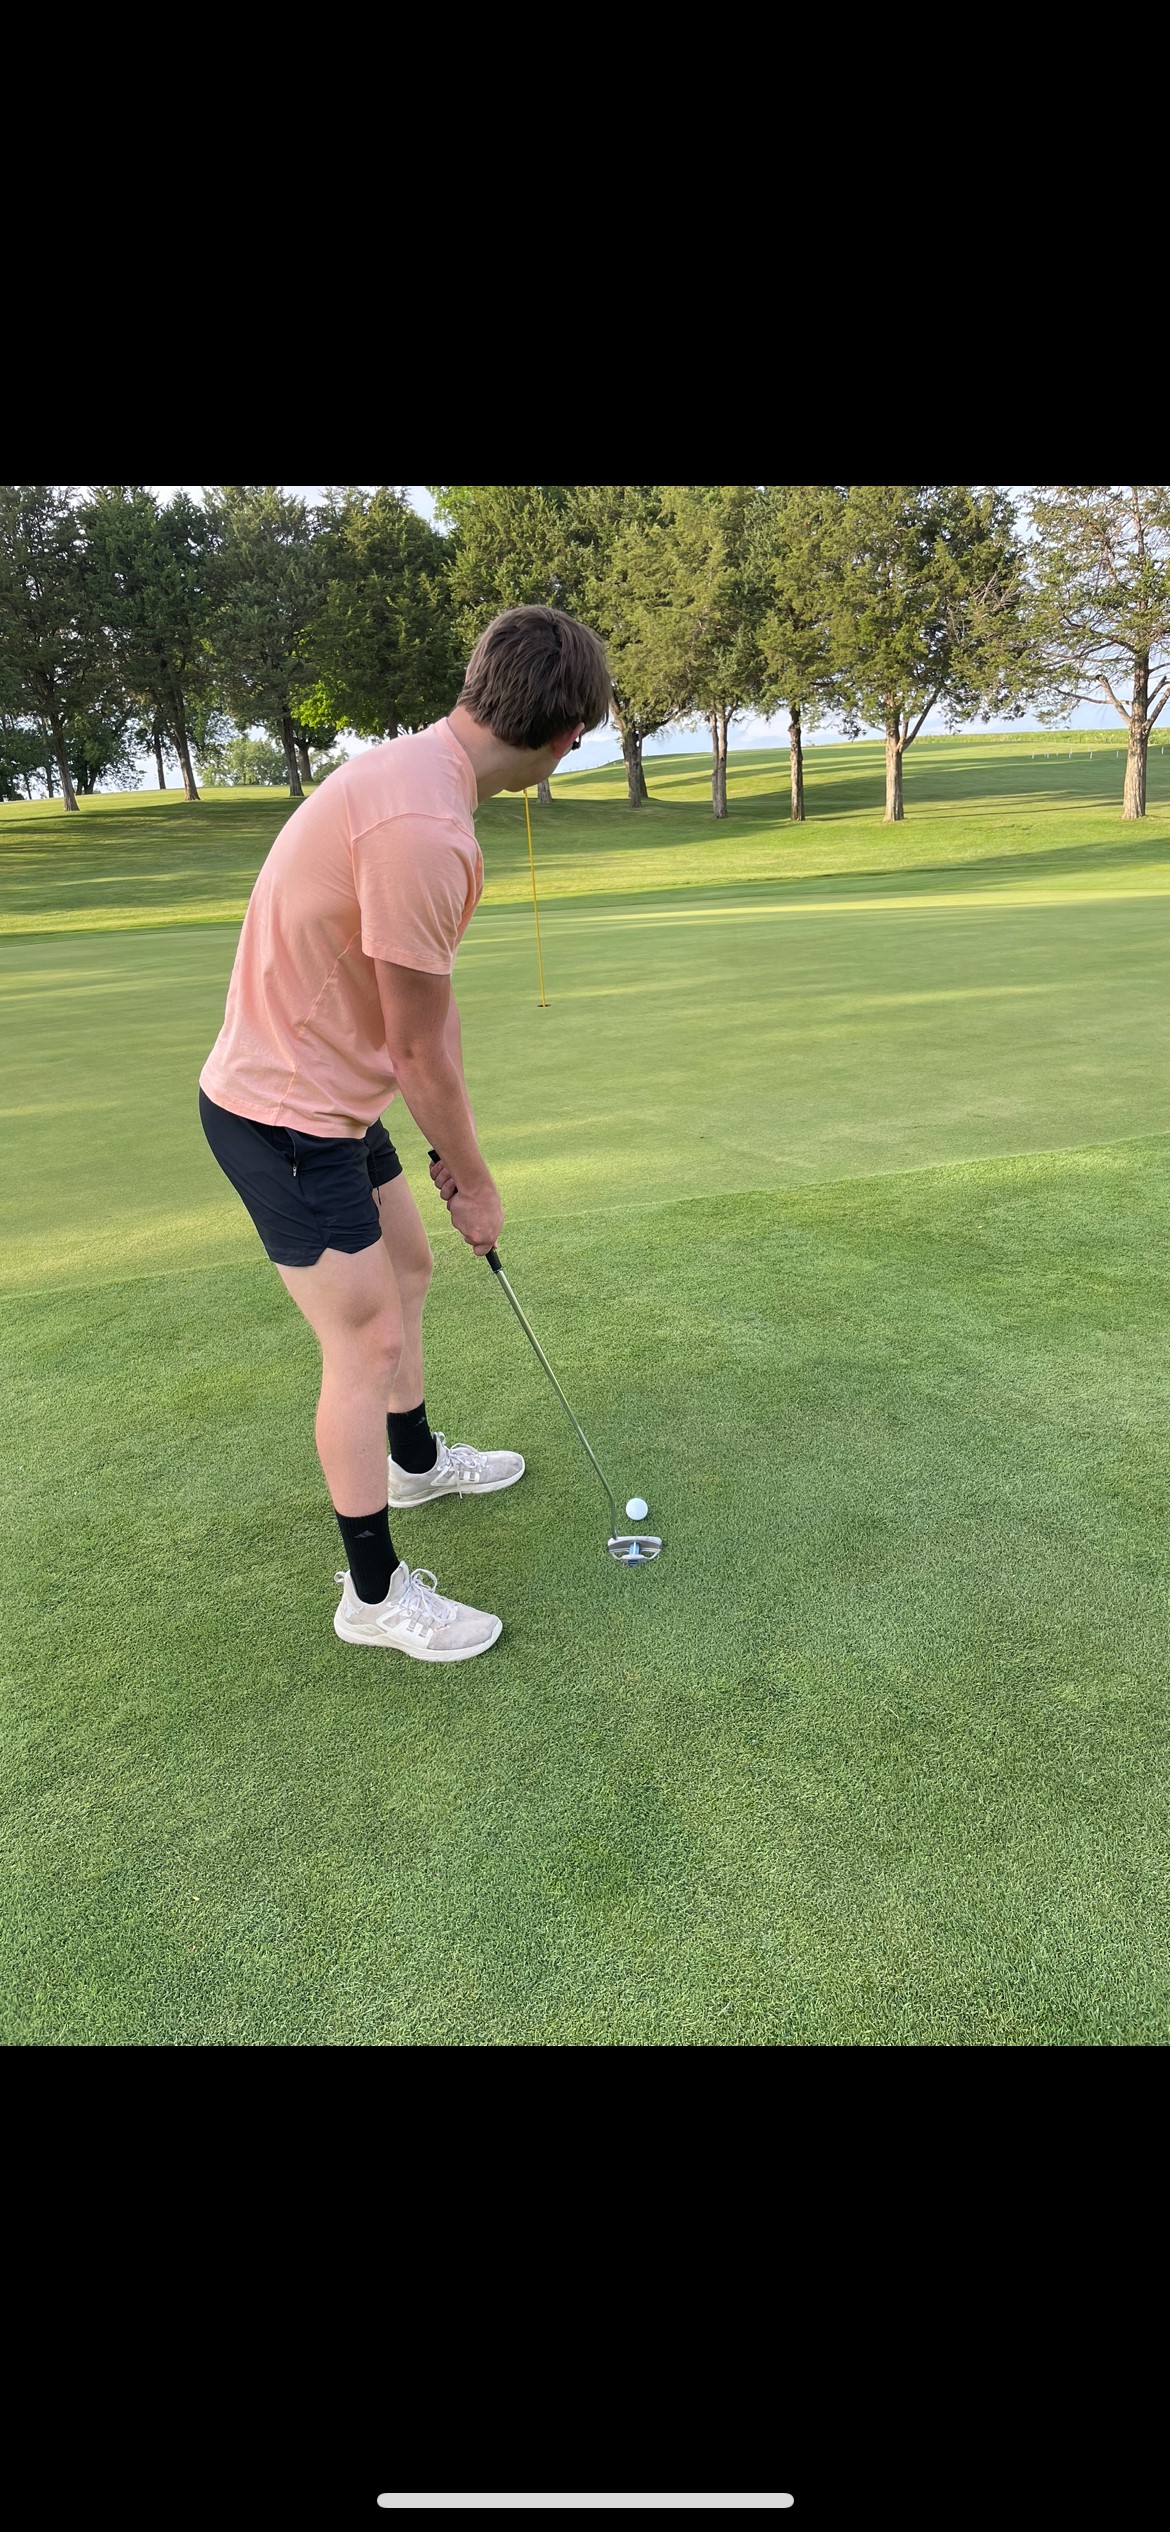 this is a photo of my friend golfing